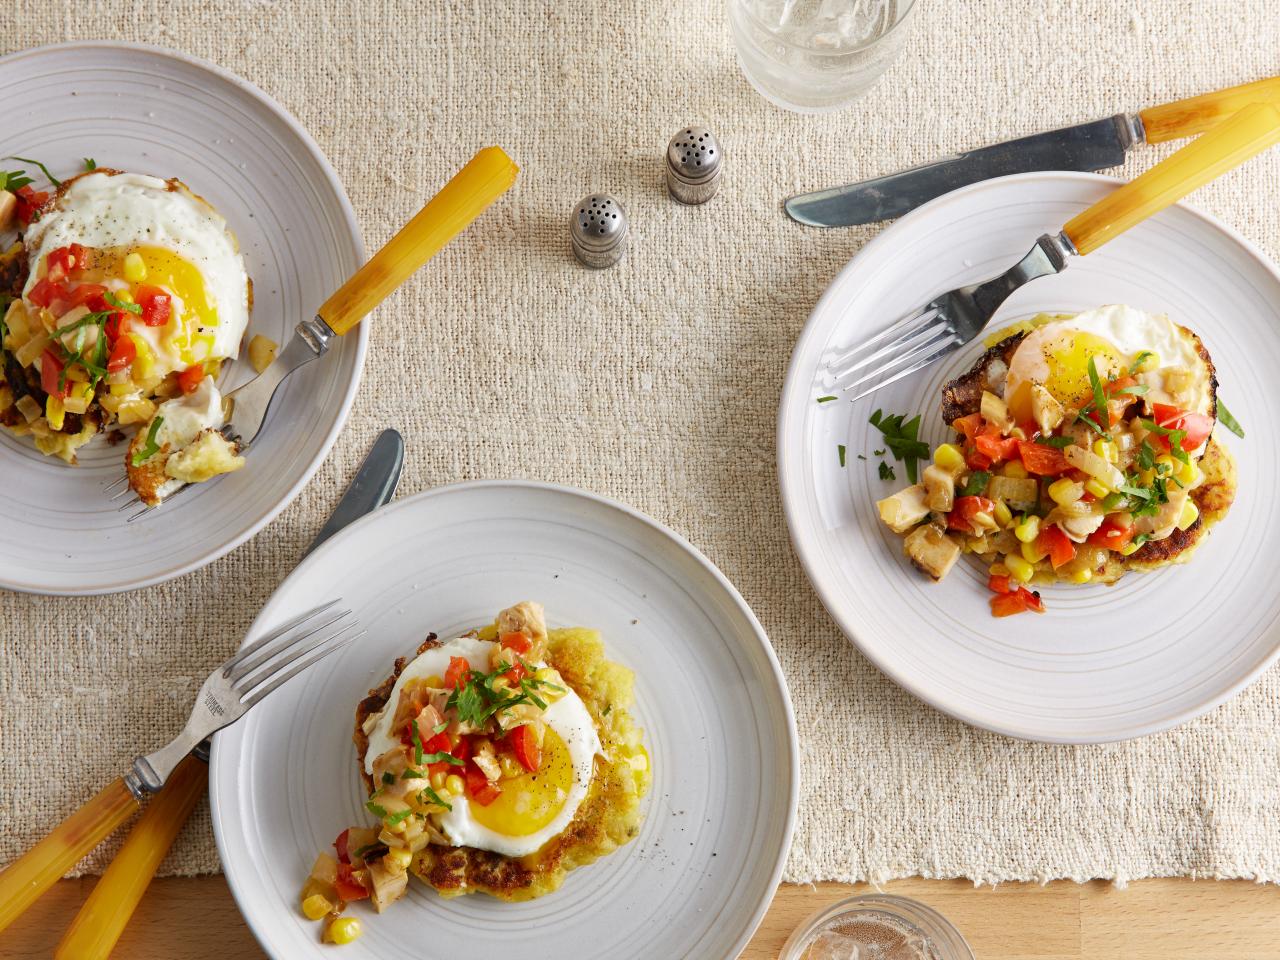 https://food.fnr.sndimg.com/content/dam/images/food/fullset/2014/6/5/1/FN_Potato-Cakes-with-Fried-Eggs-and-Turkey-Red-Pepper-Hash_s4x3.jpg.rend.hgtvcom.1280.960.suffix/1402104439871.jpeg